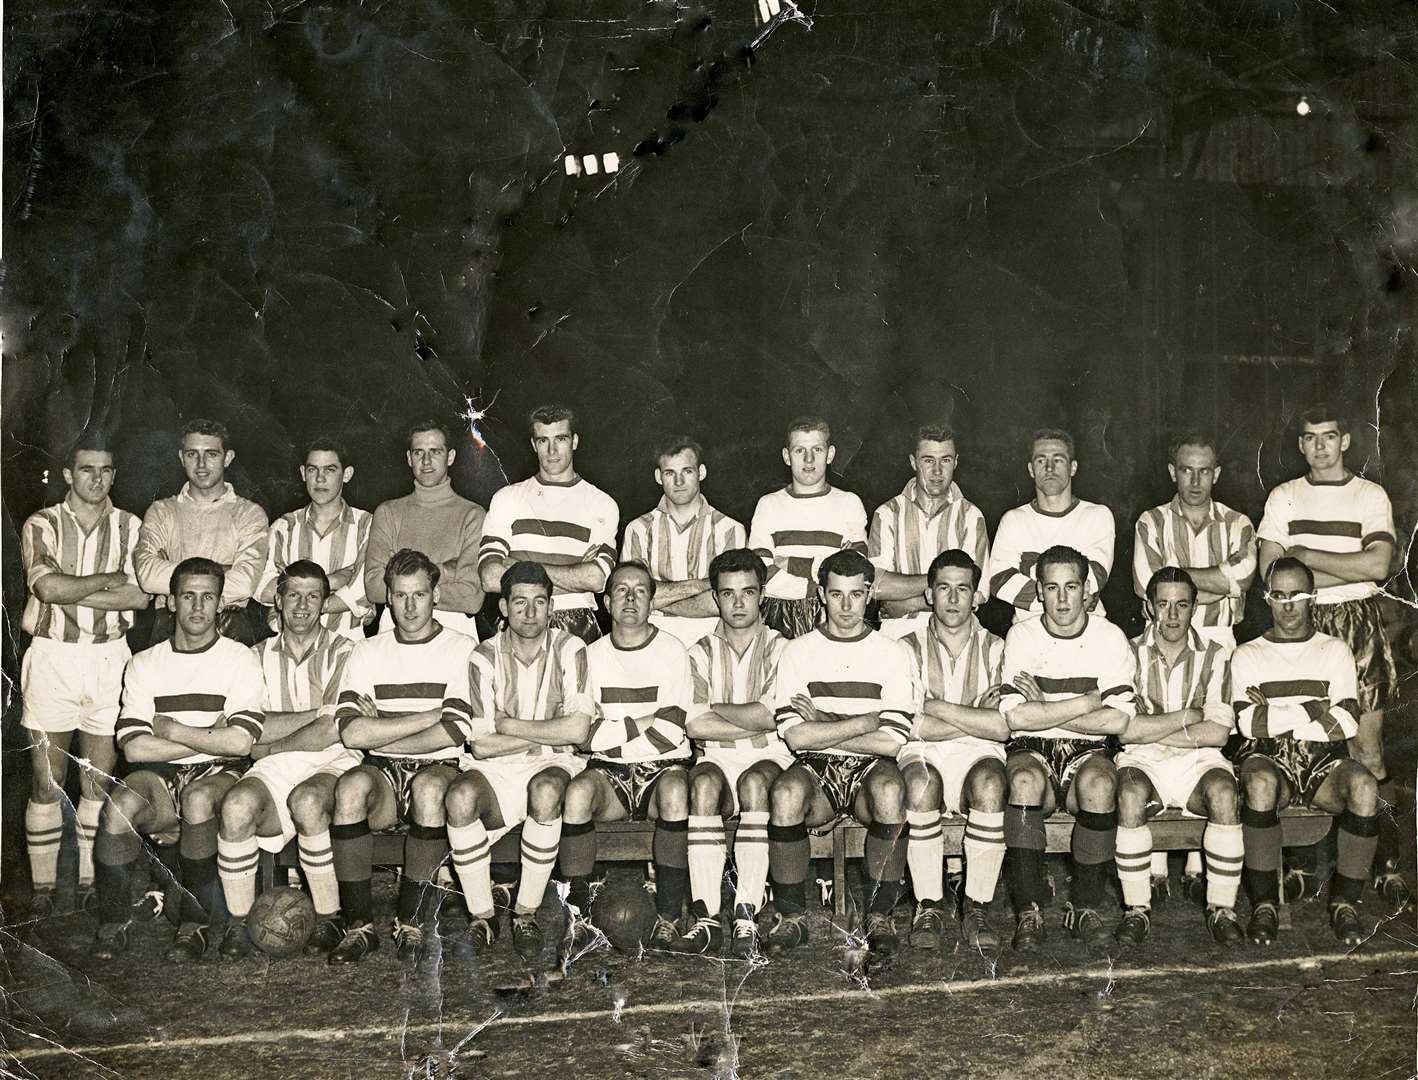 Sandy Ballantyne (Back row, far left) was in the 1959 line-up to mark the installation of floodlighting at Inverness Caledonian FC's ground.